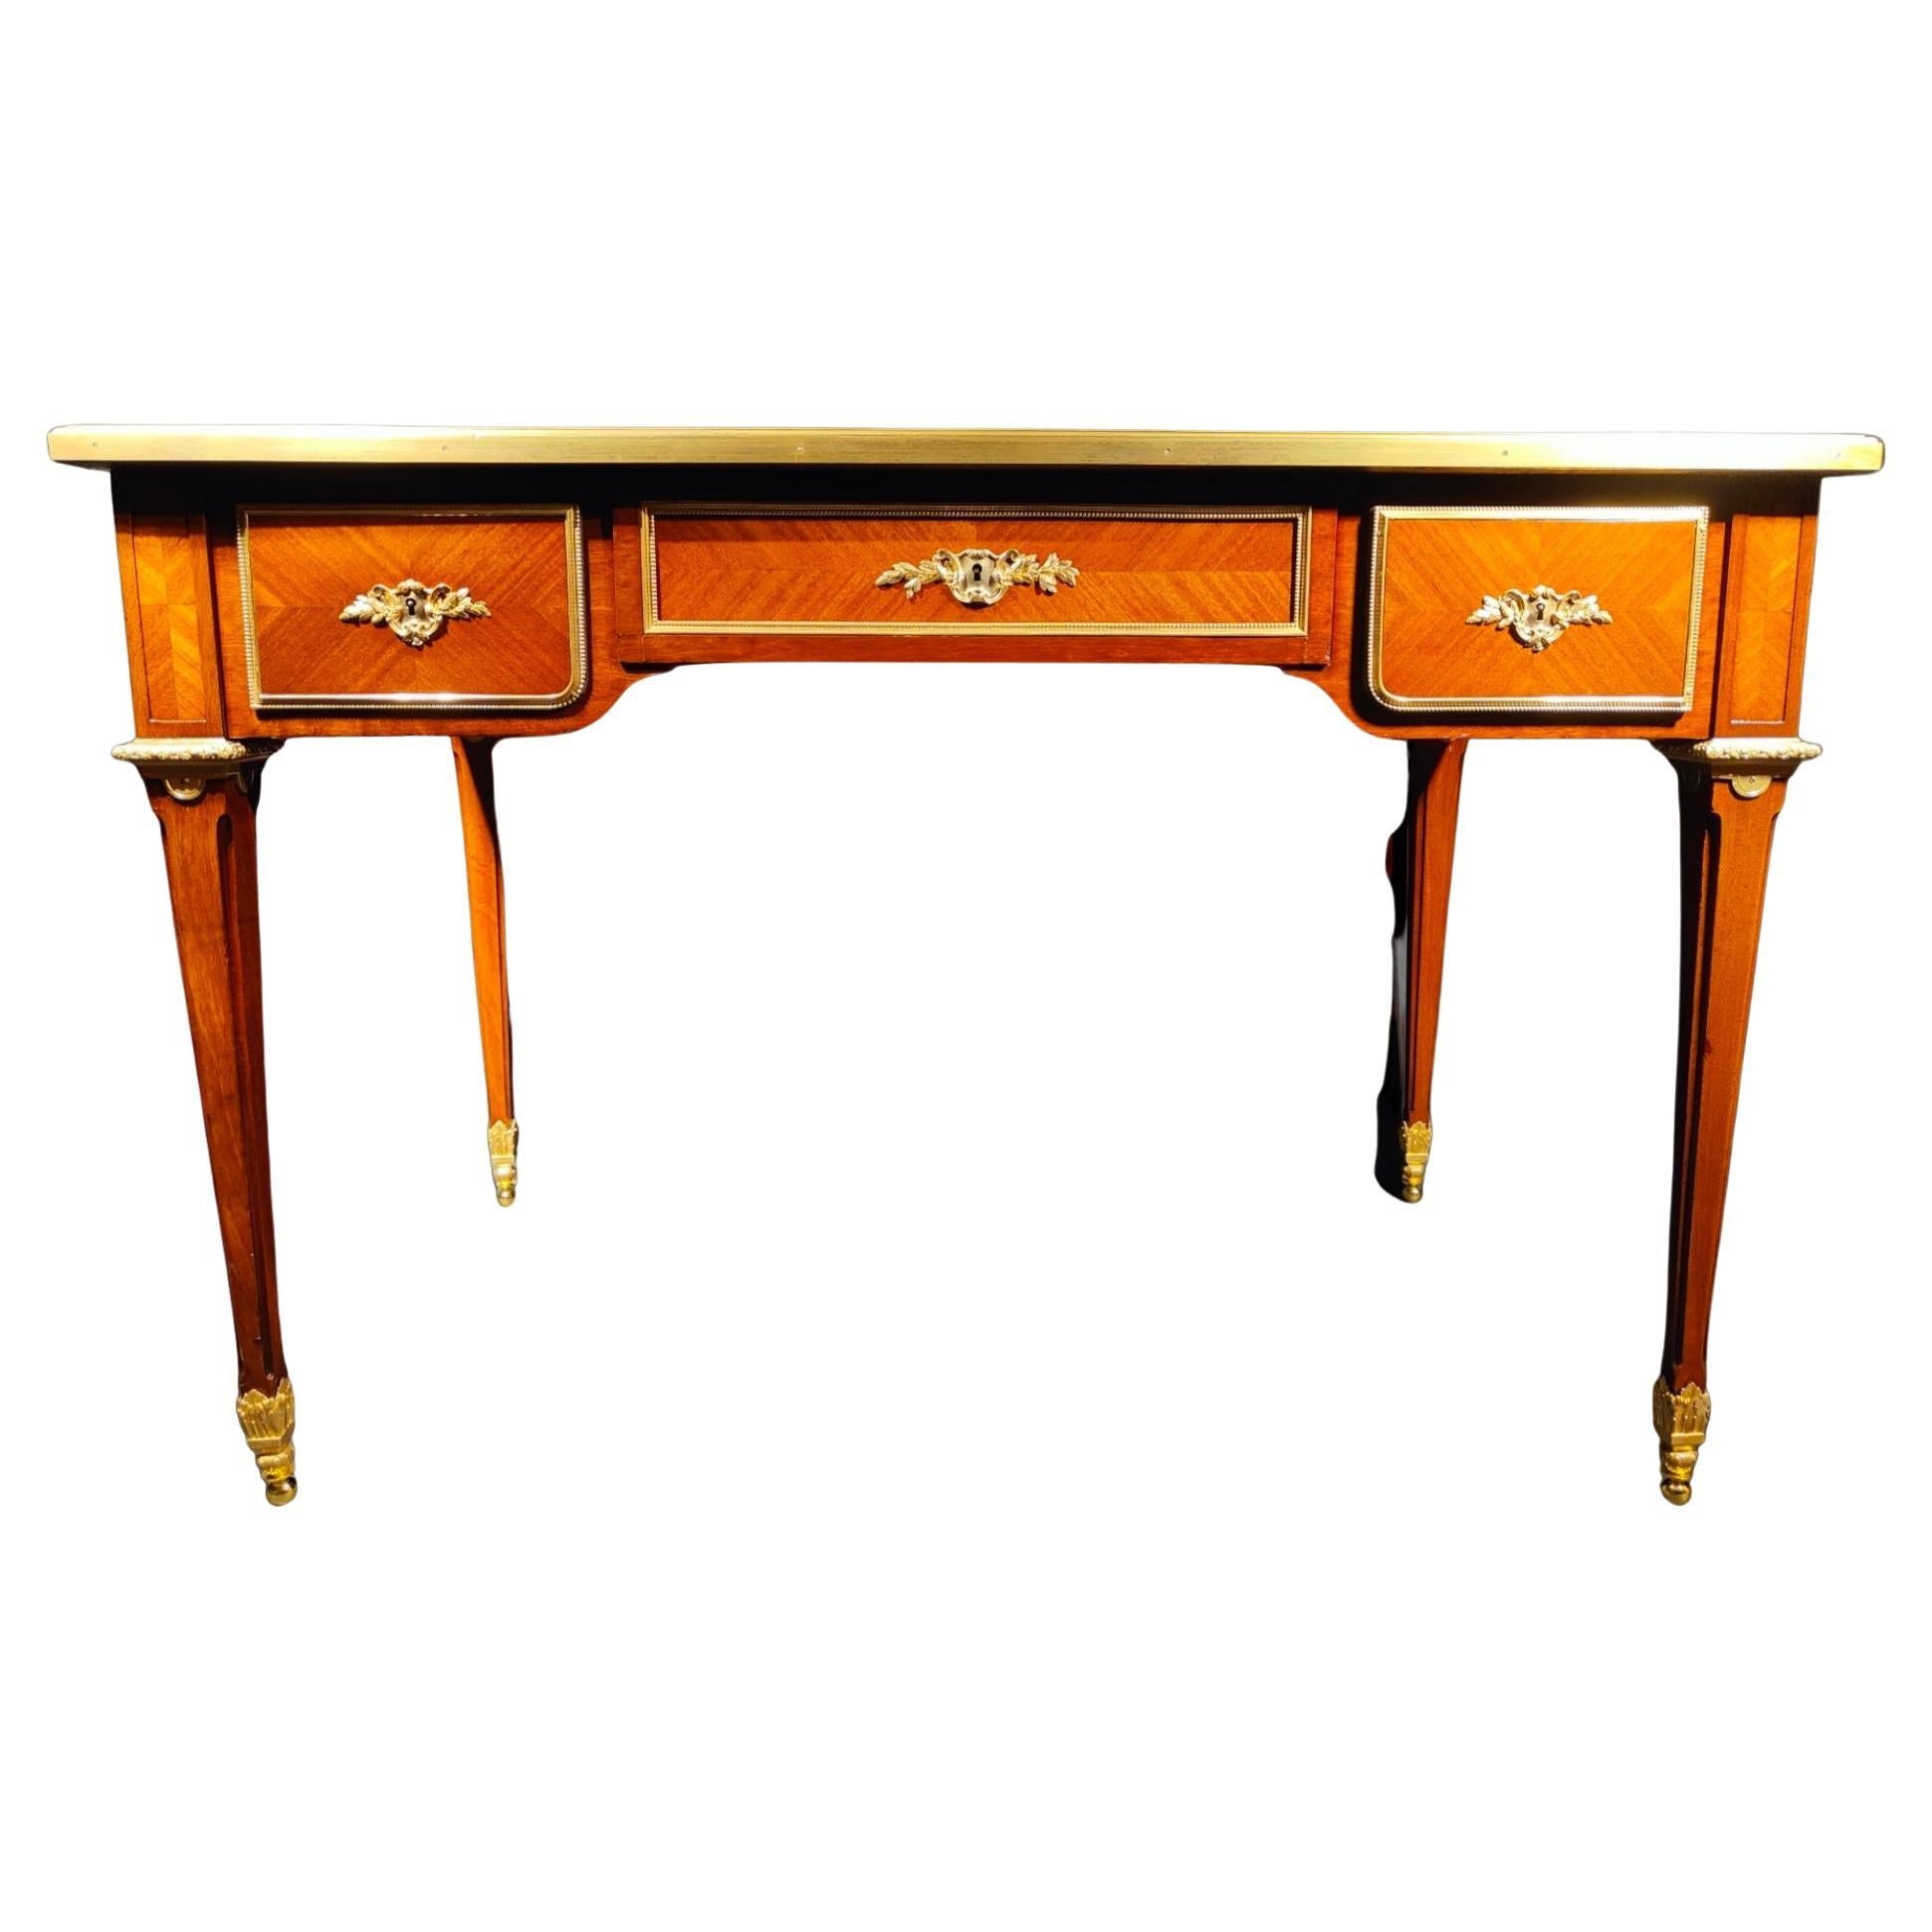 Very Fine Gilt Bronze Mounted Tulipwood and Amaranth Desk by L. Cueunieres